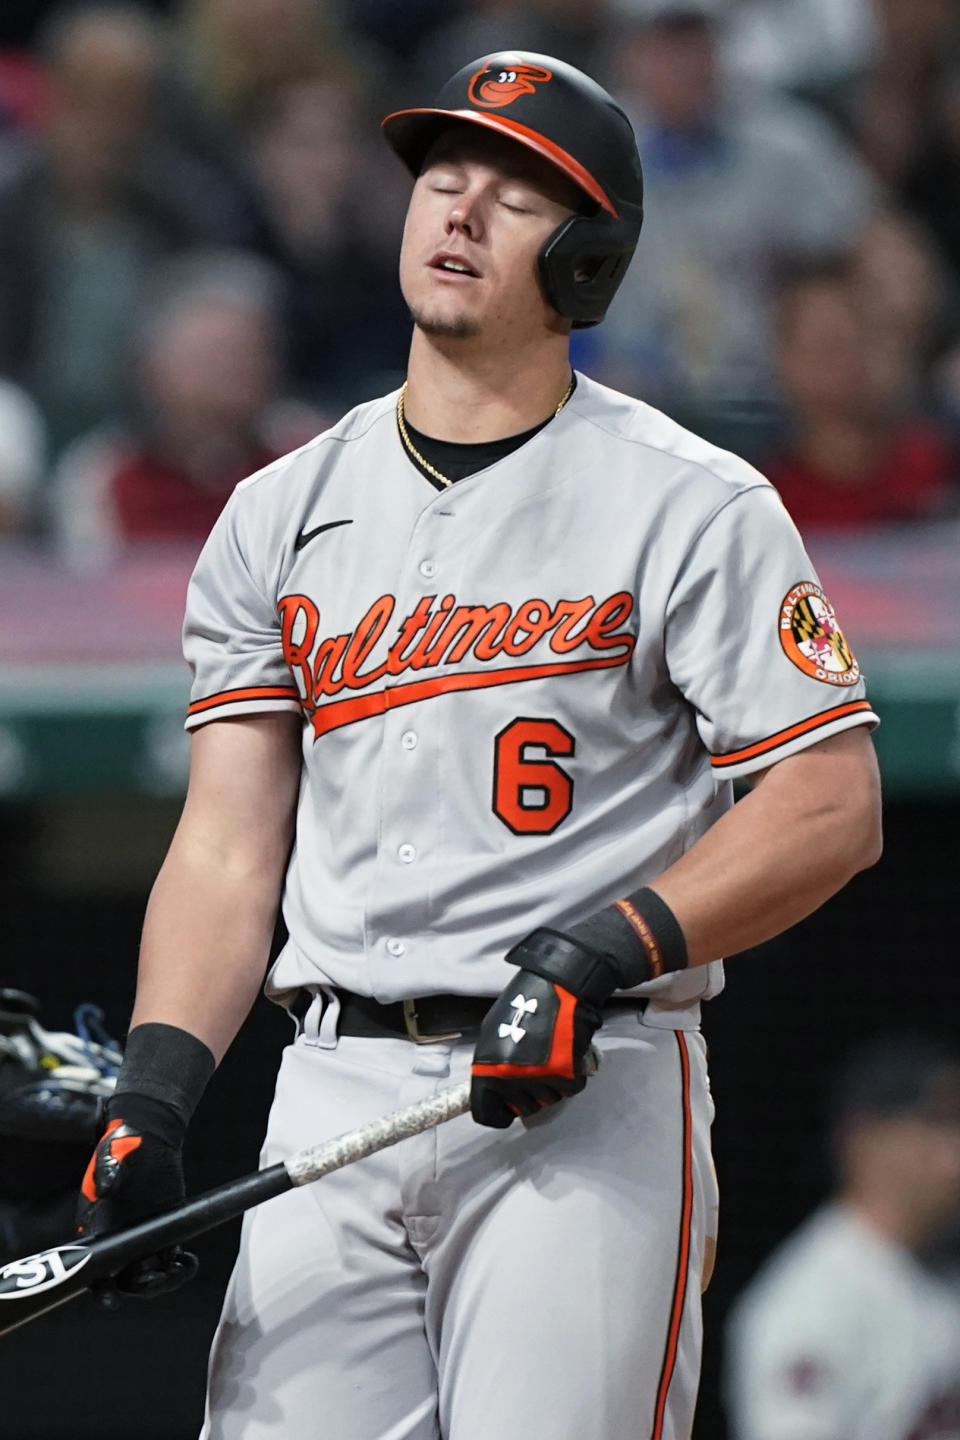 Baltimore Orioles' Ryan Mountcastle reacts after striking out during the ninth inning of the team's baseball game against the Cleveland Indians, Wednesday, June 16, 2021, in Cleveland. The Indians won 8-7. (AP Photo/Tony Dejak)